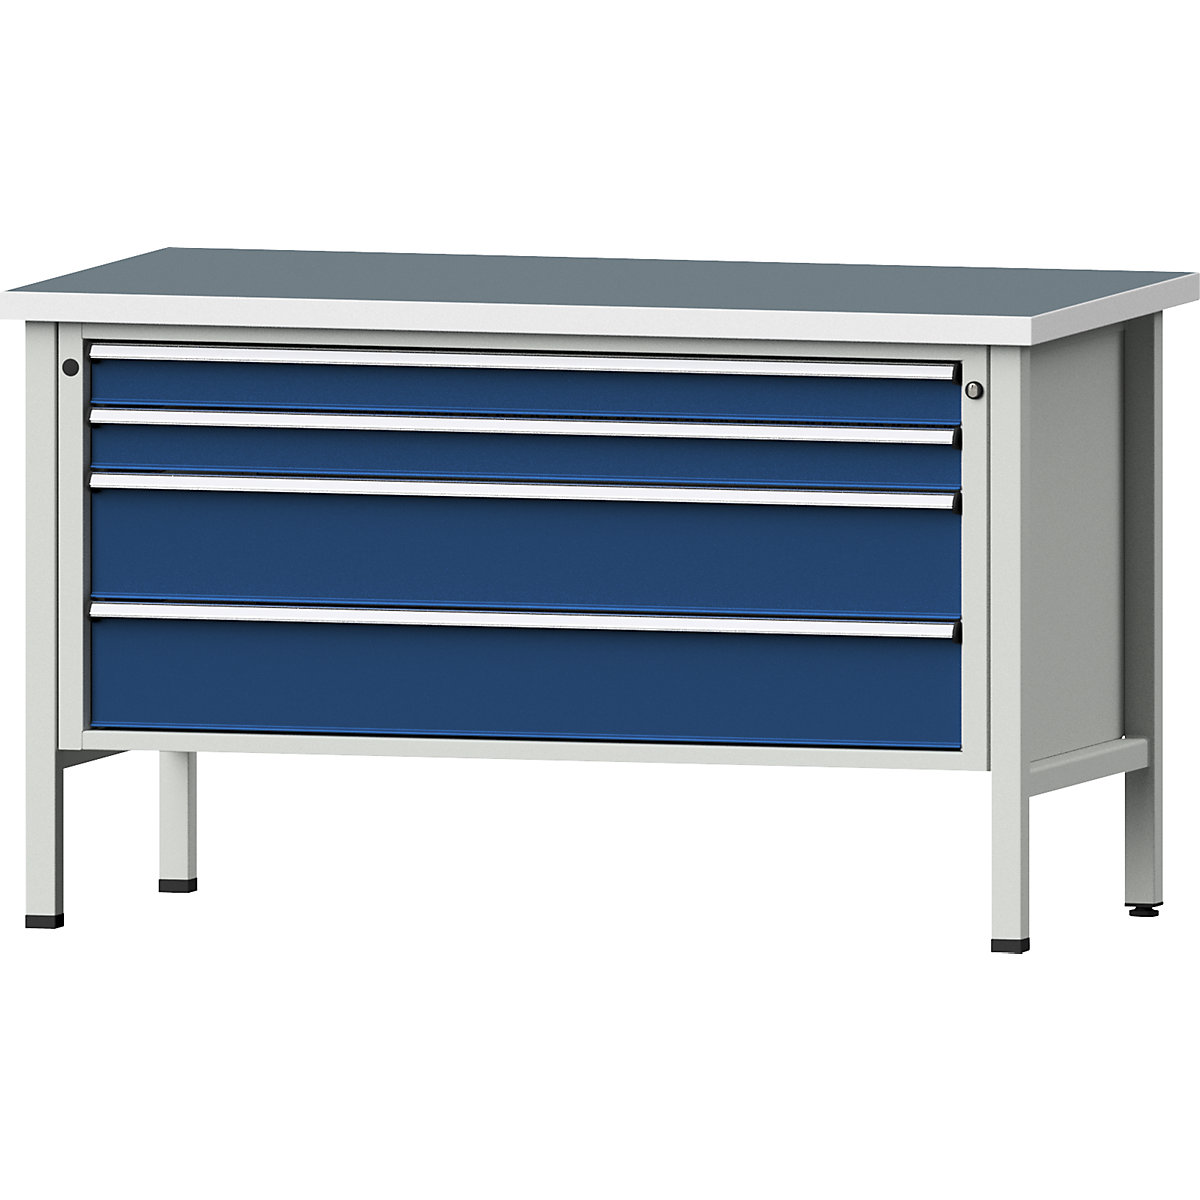 Workbench 1500 mm wide, frame construction – ANKE, 4 drawers: 2 x 90, 2 x 180 mm, universal worktop, height 890 mm-7